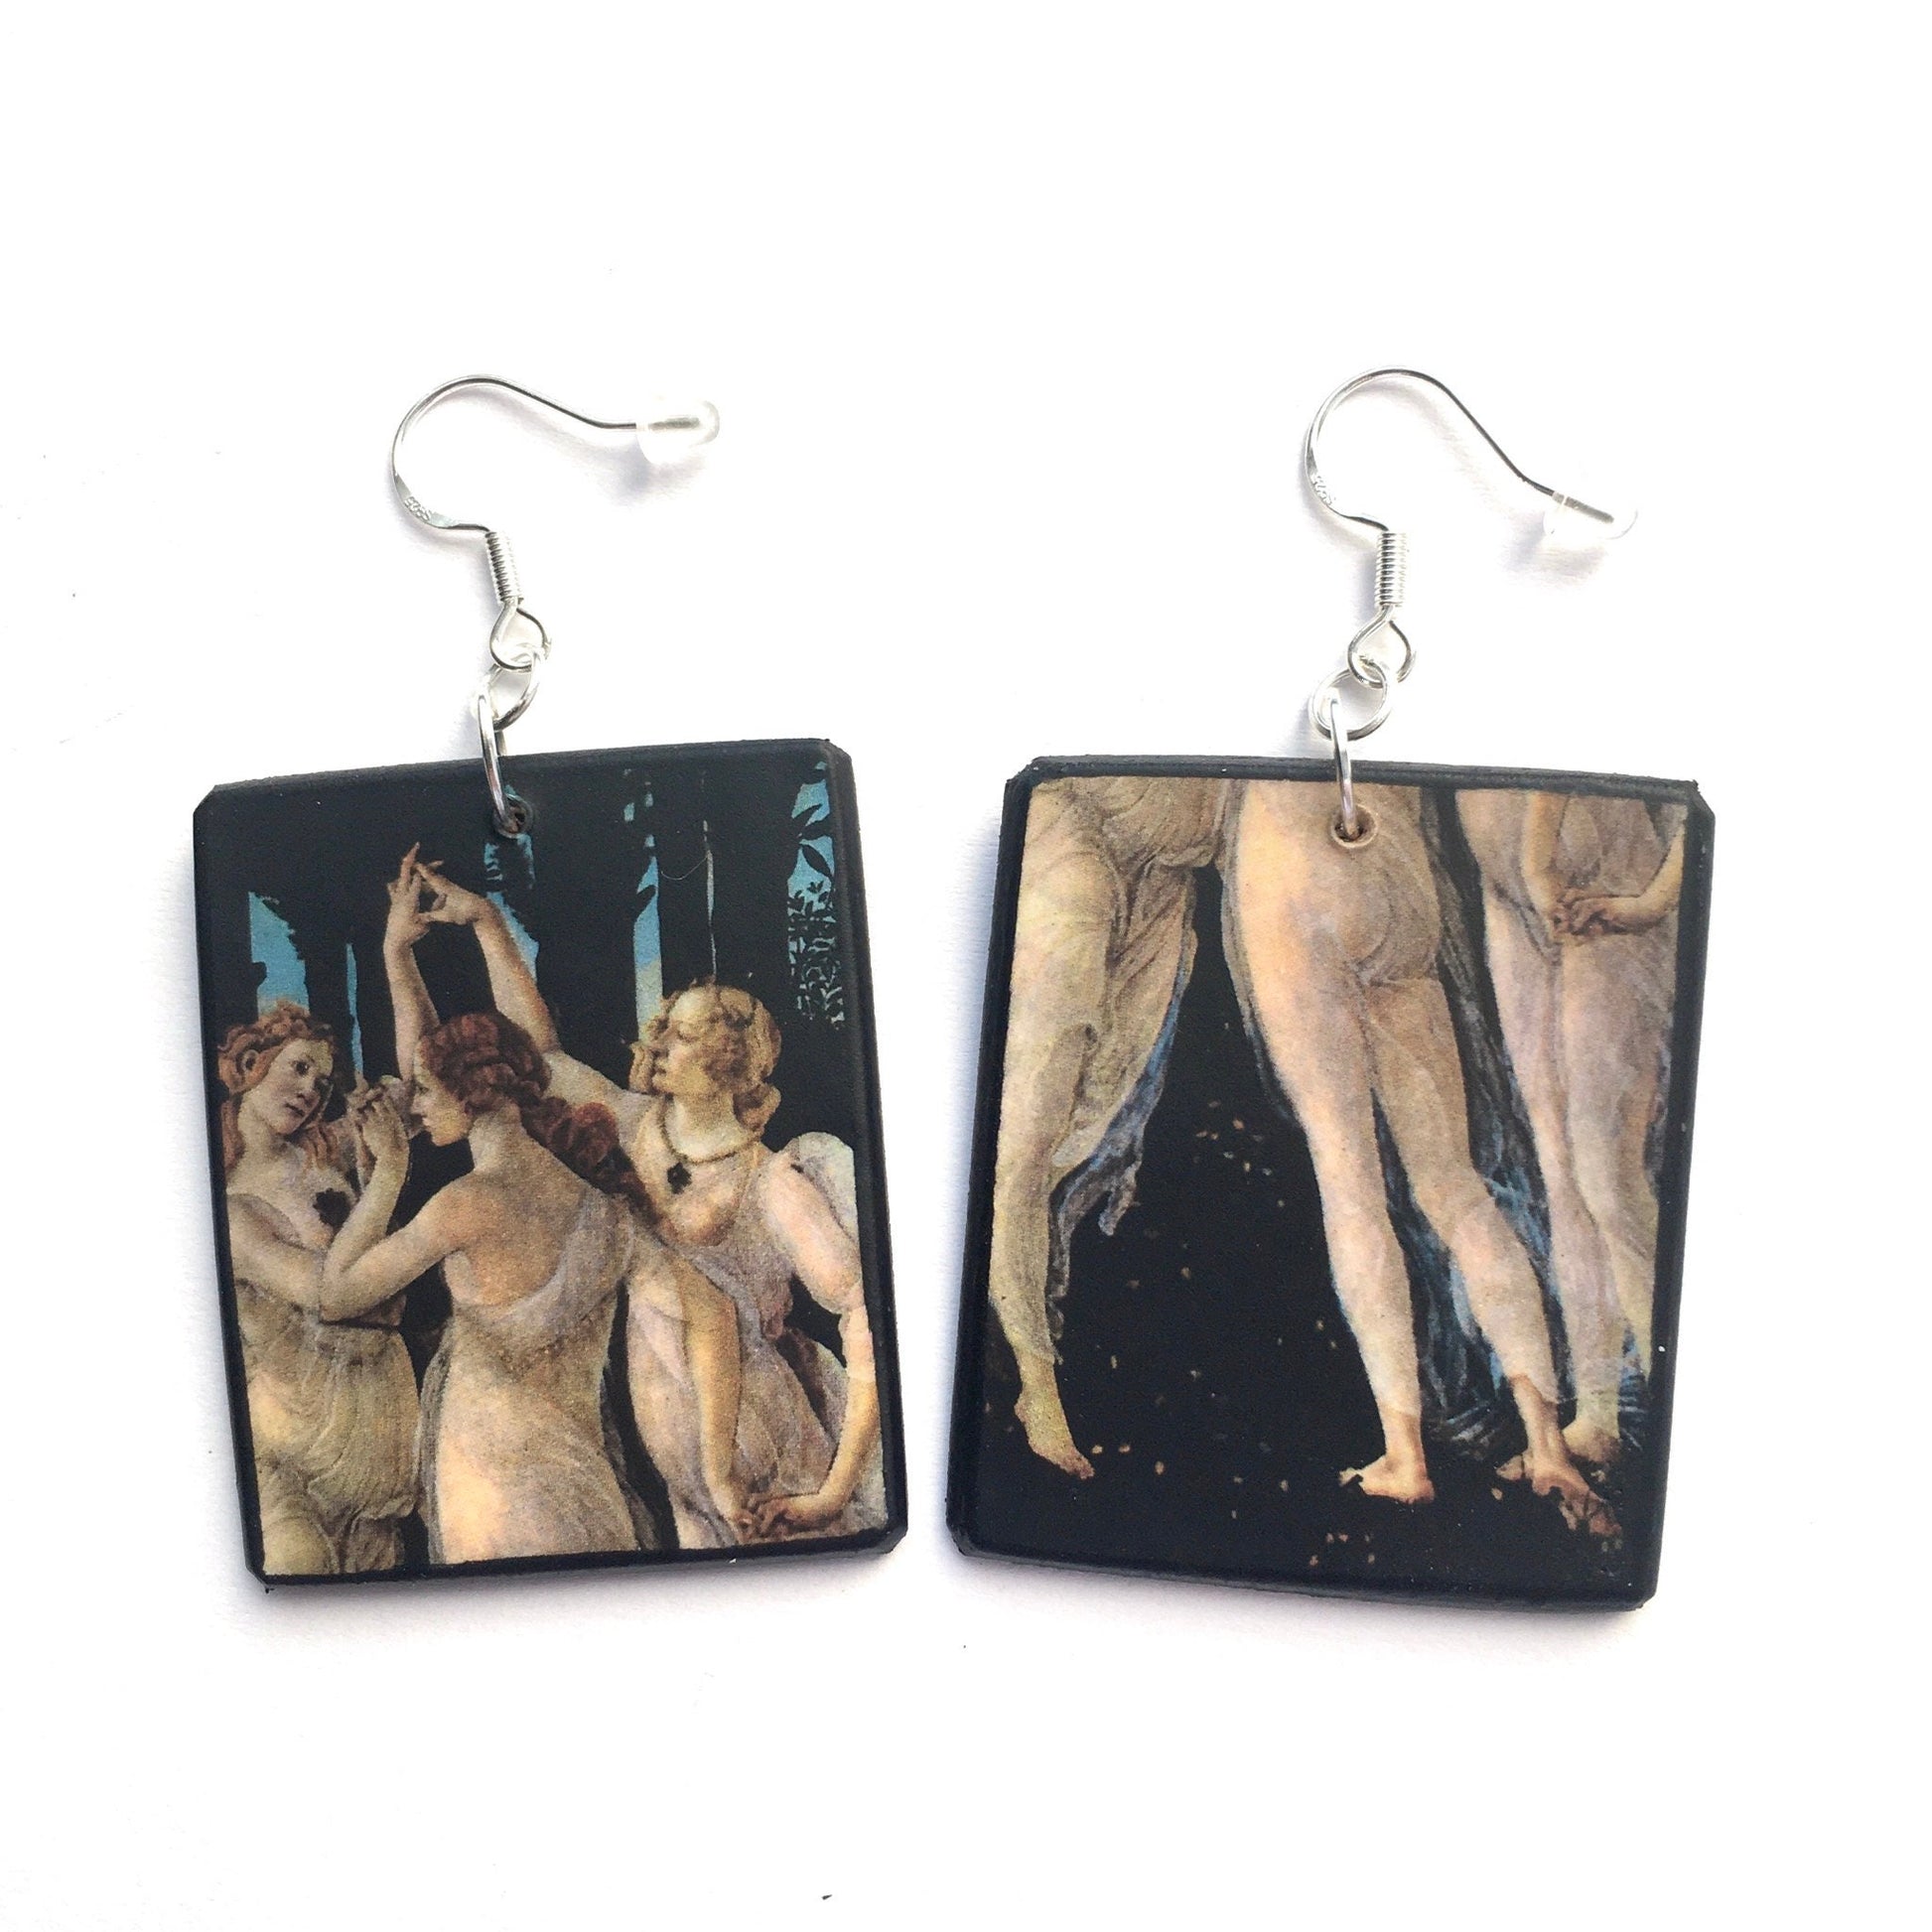 "The Three Graces" famous  Italian Renaissance art painting by Sandro Botticelli is the detail for these aesthetic, mismatched, sustainable wooden art earrings. The earrings arel lightweight and finished with sterling silver 925 hooks